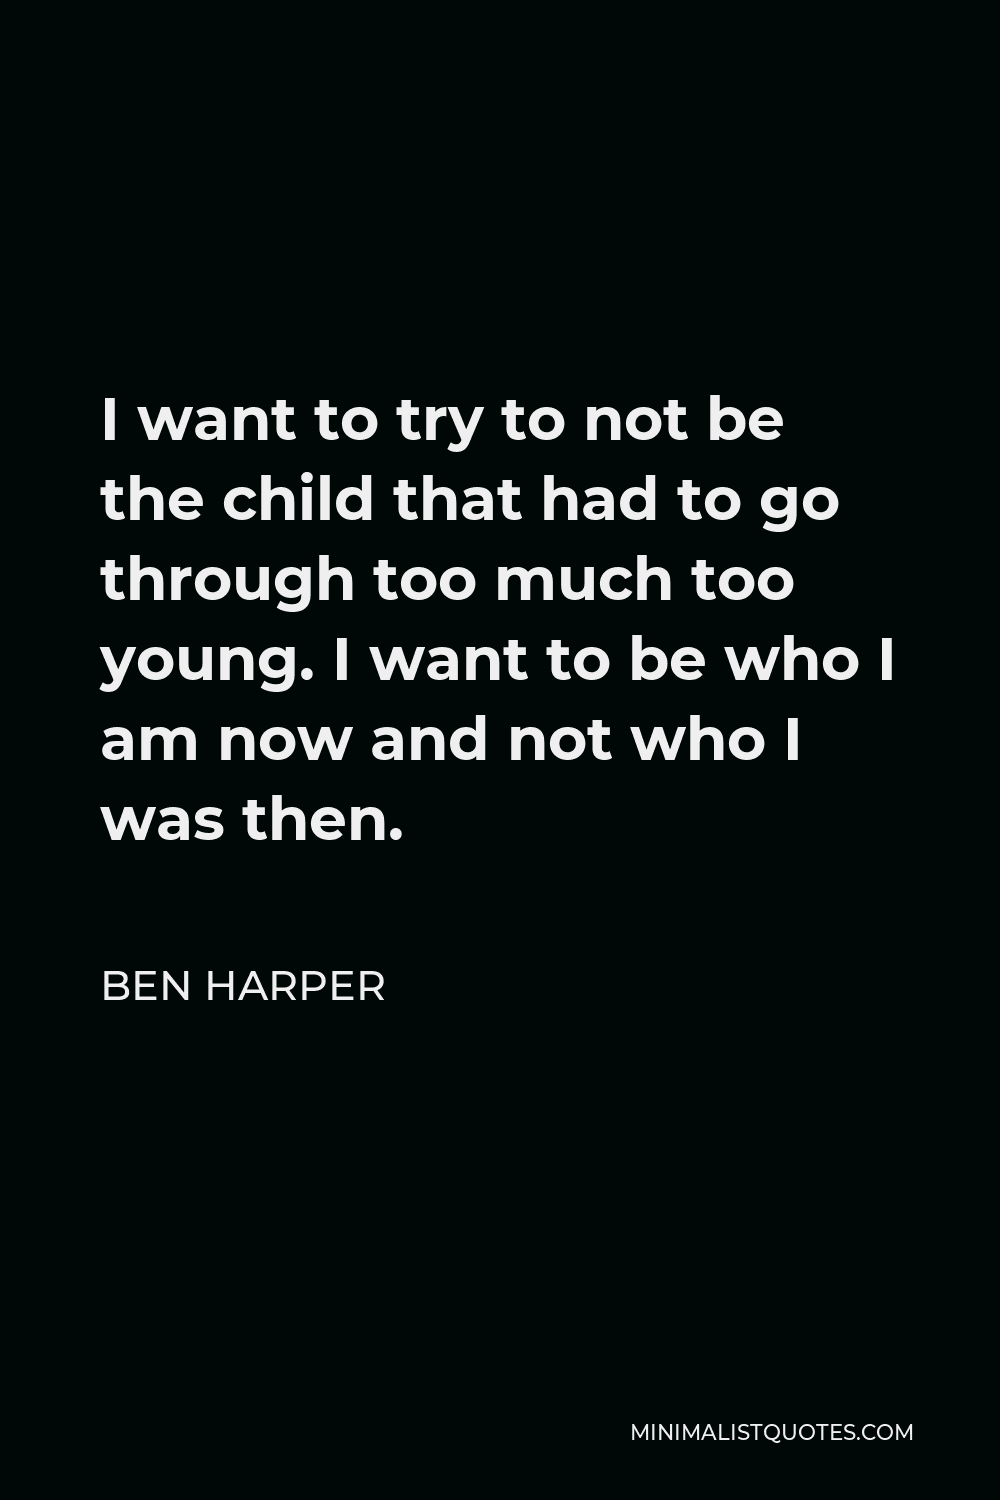 Ben Harper Quote - I want to try to not be the child that had to go through too much too young. I want to be who I am now and not who I was then.